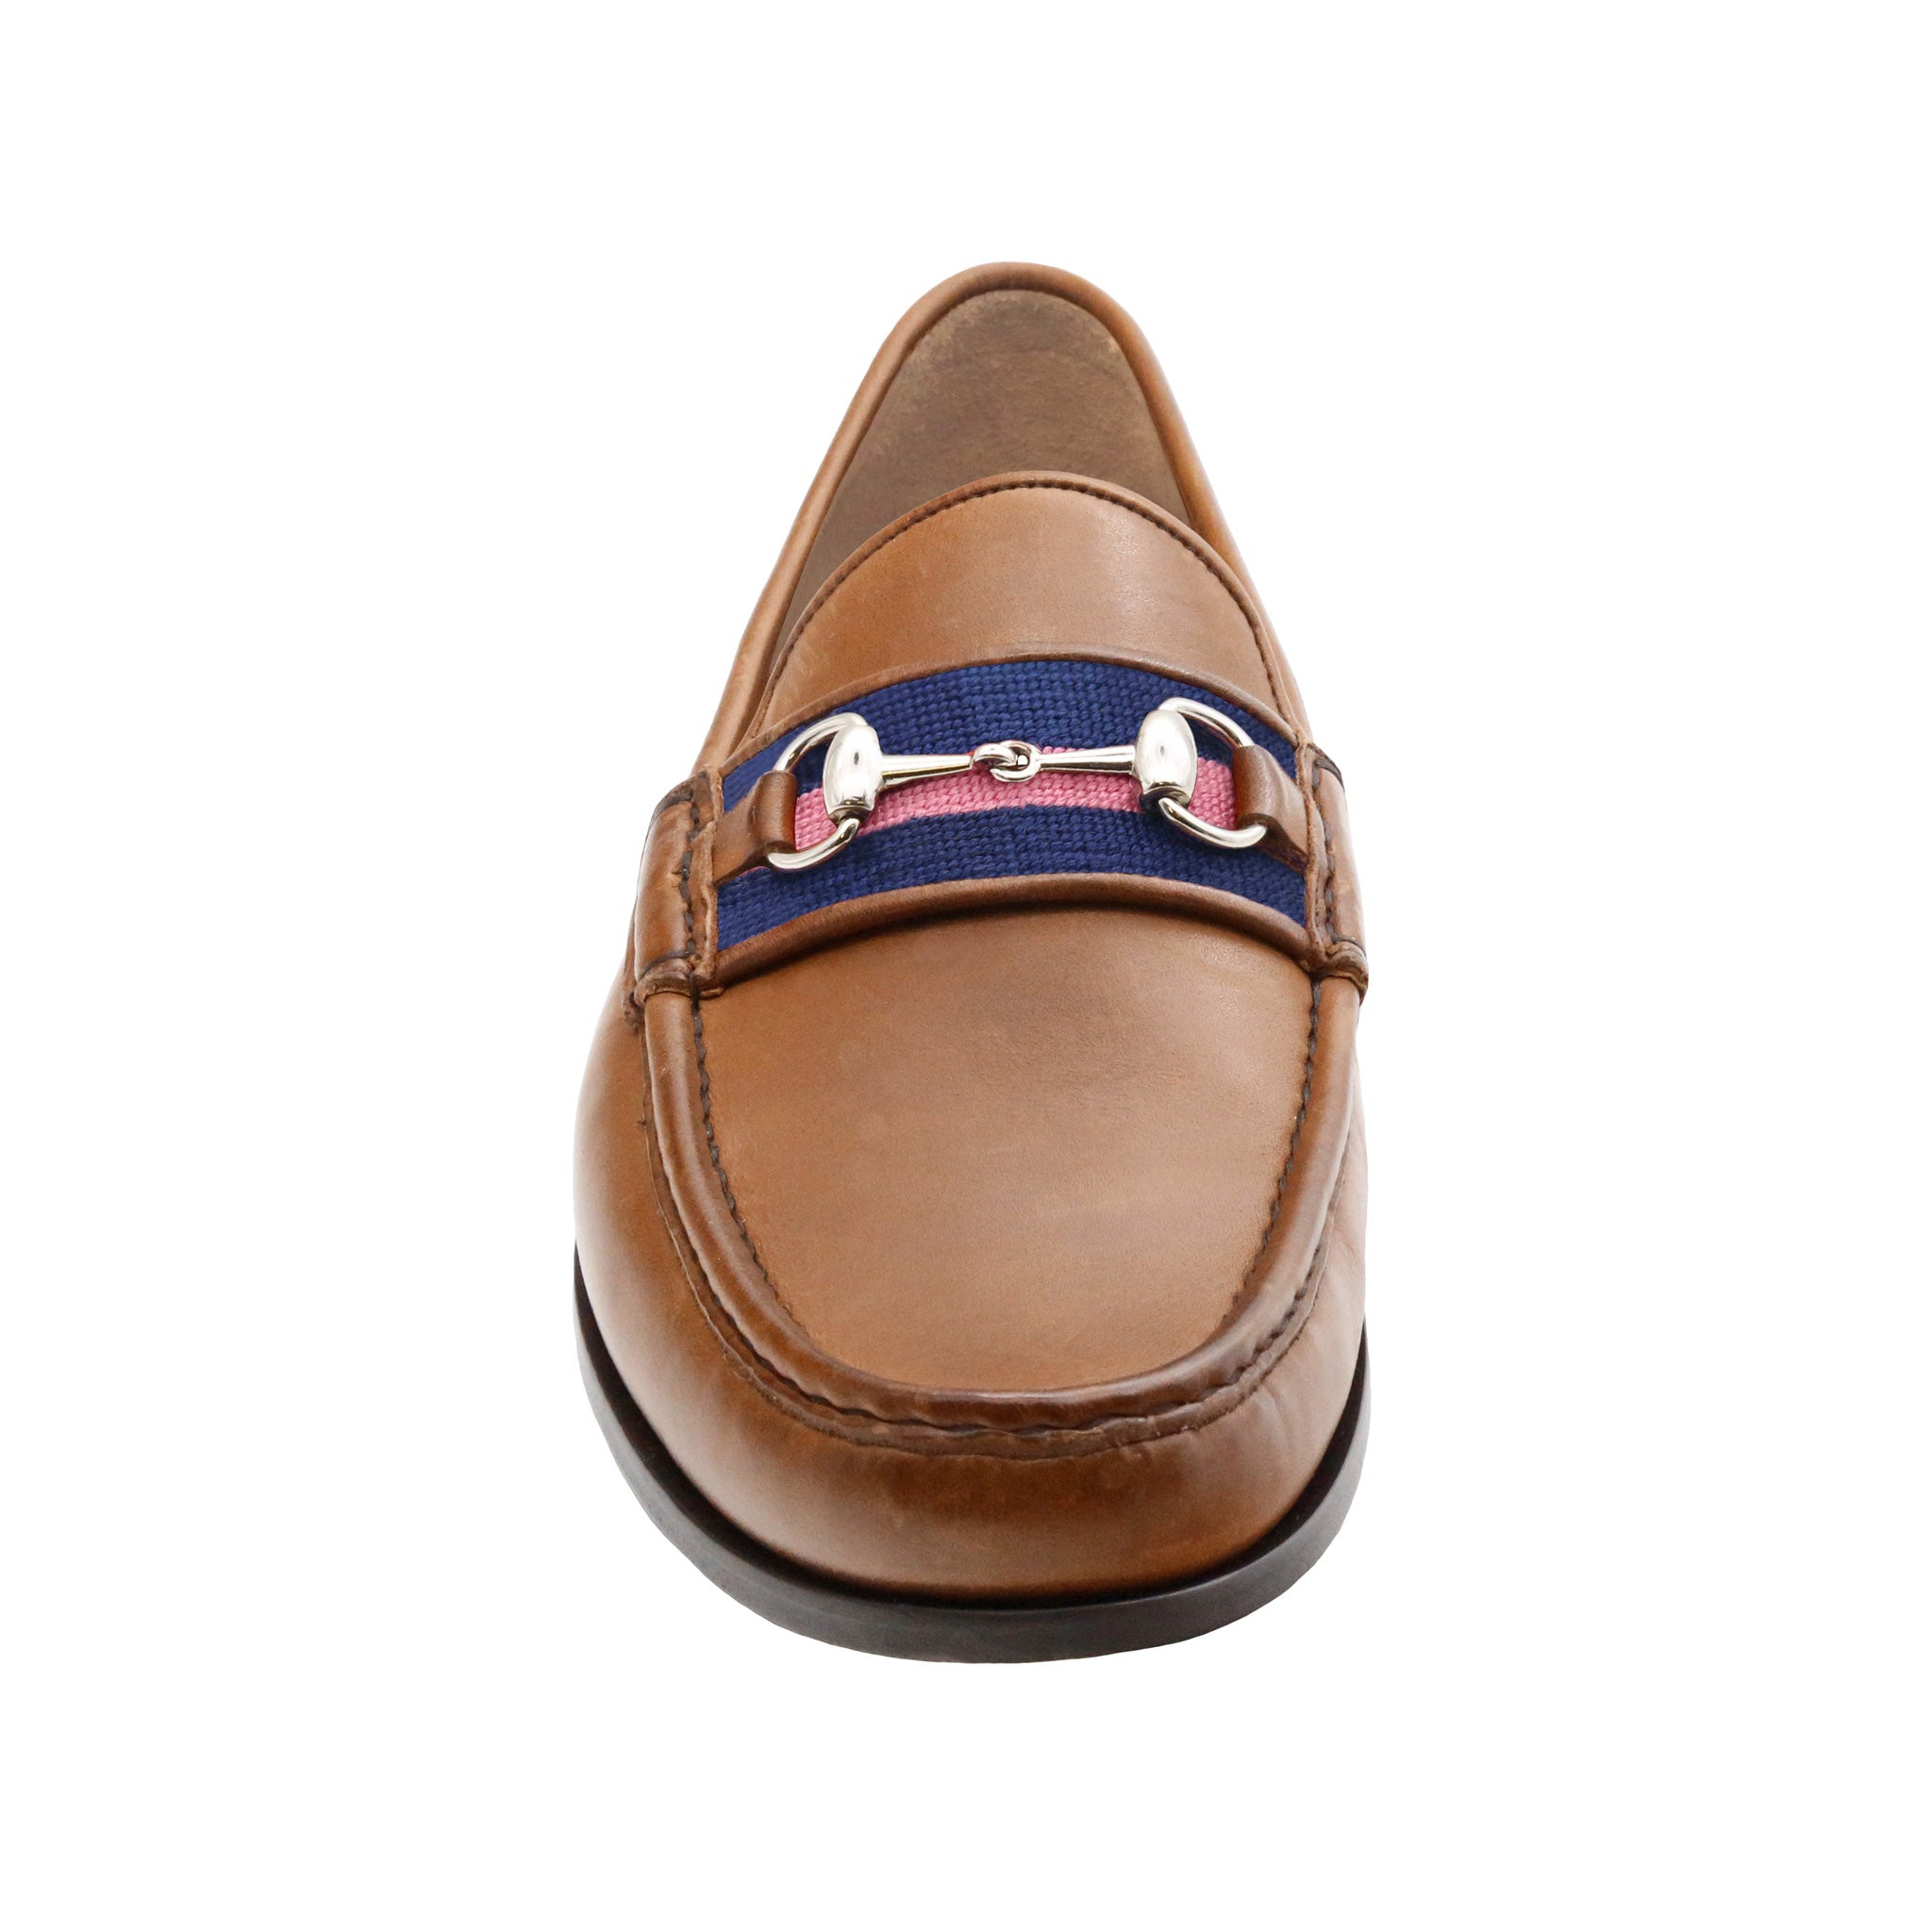 Surcingle Downing Bit Loafers (Classic Navy-Pink) (Saddle Leather)